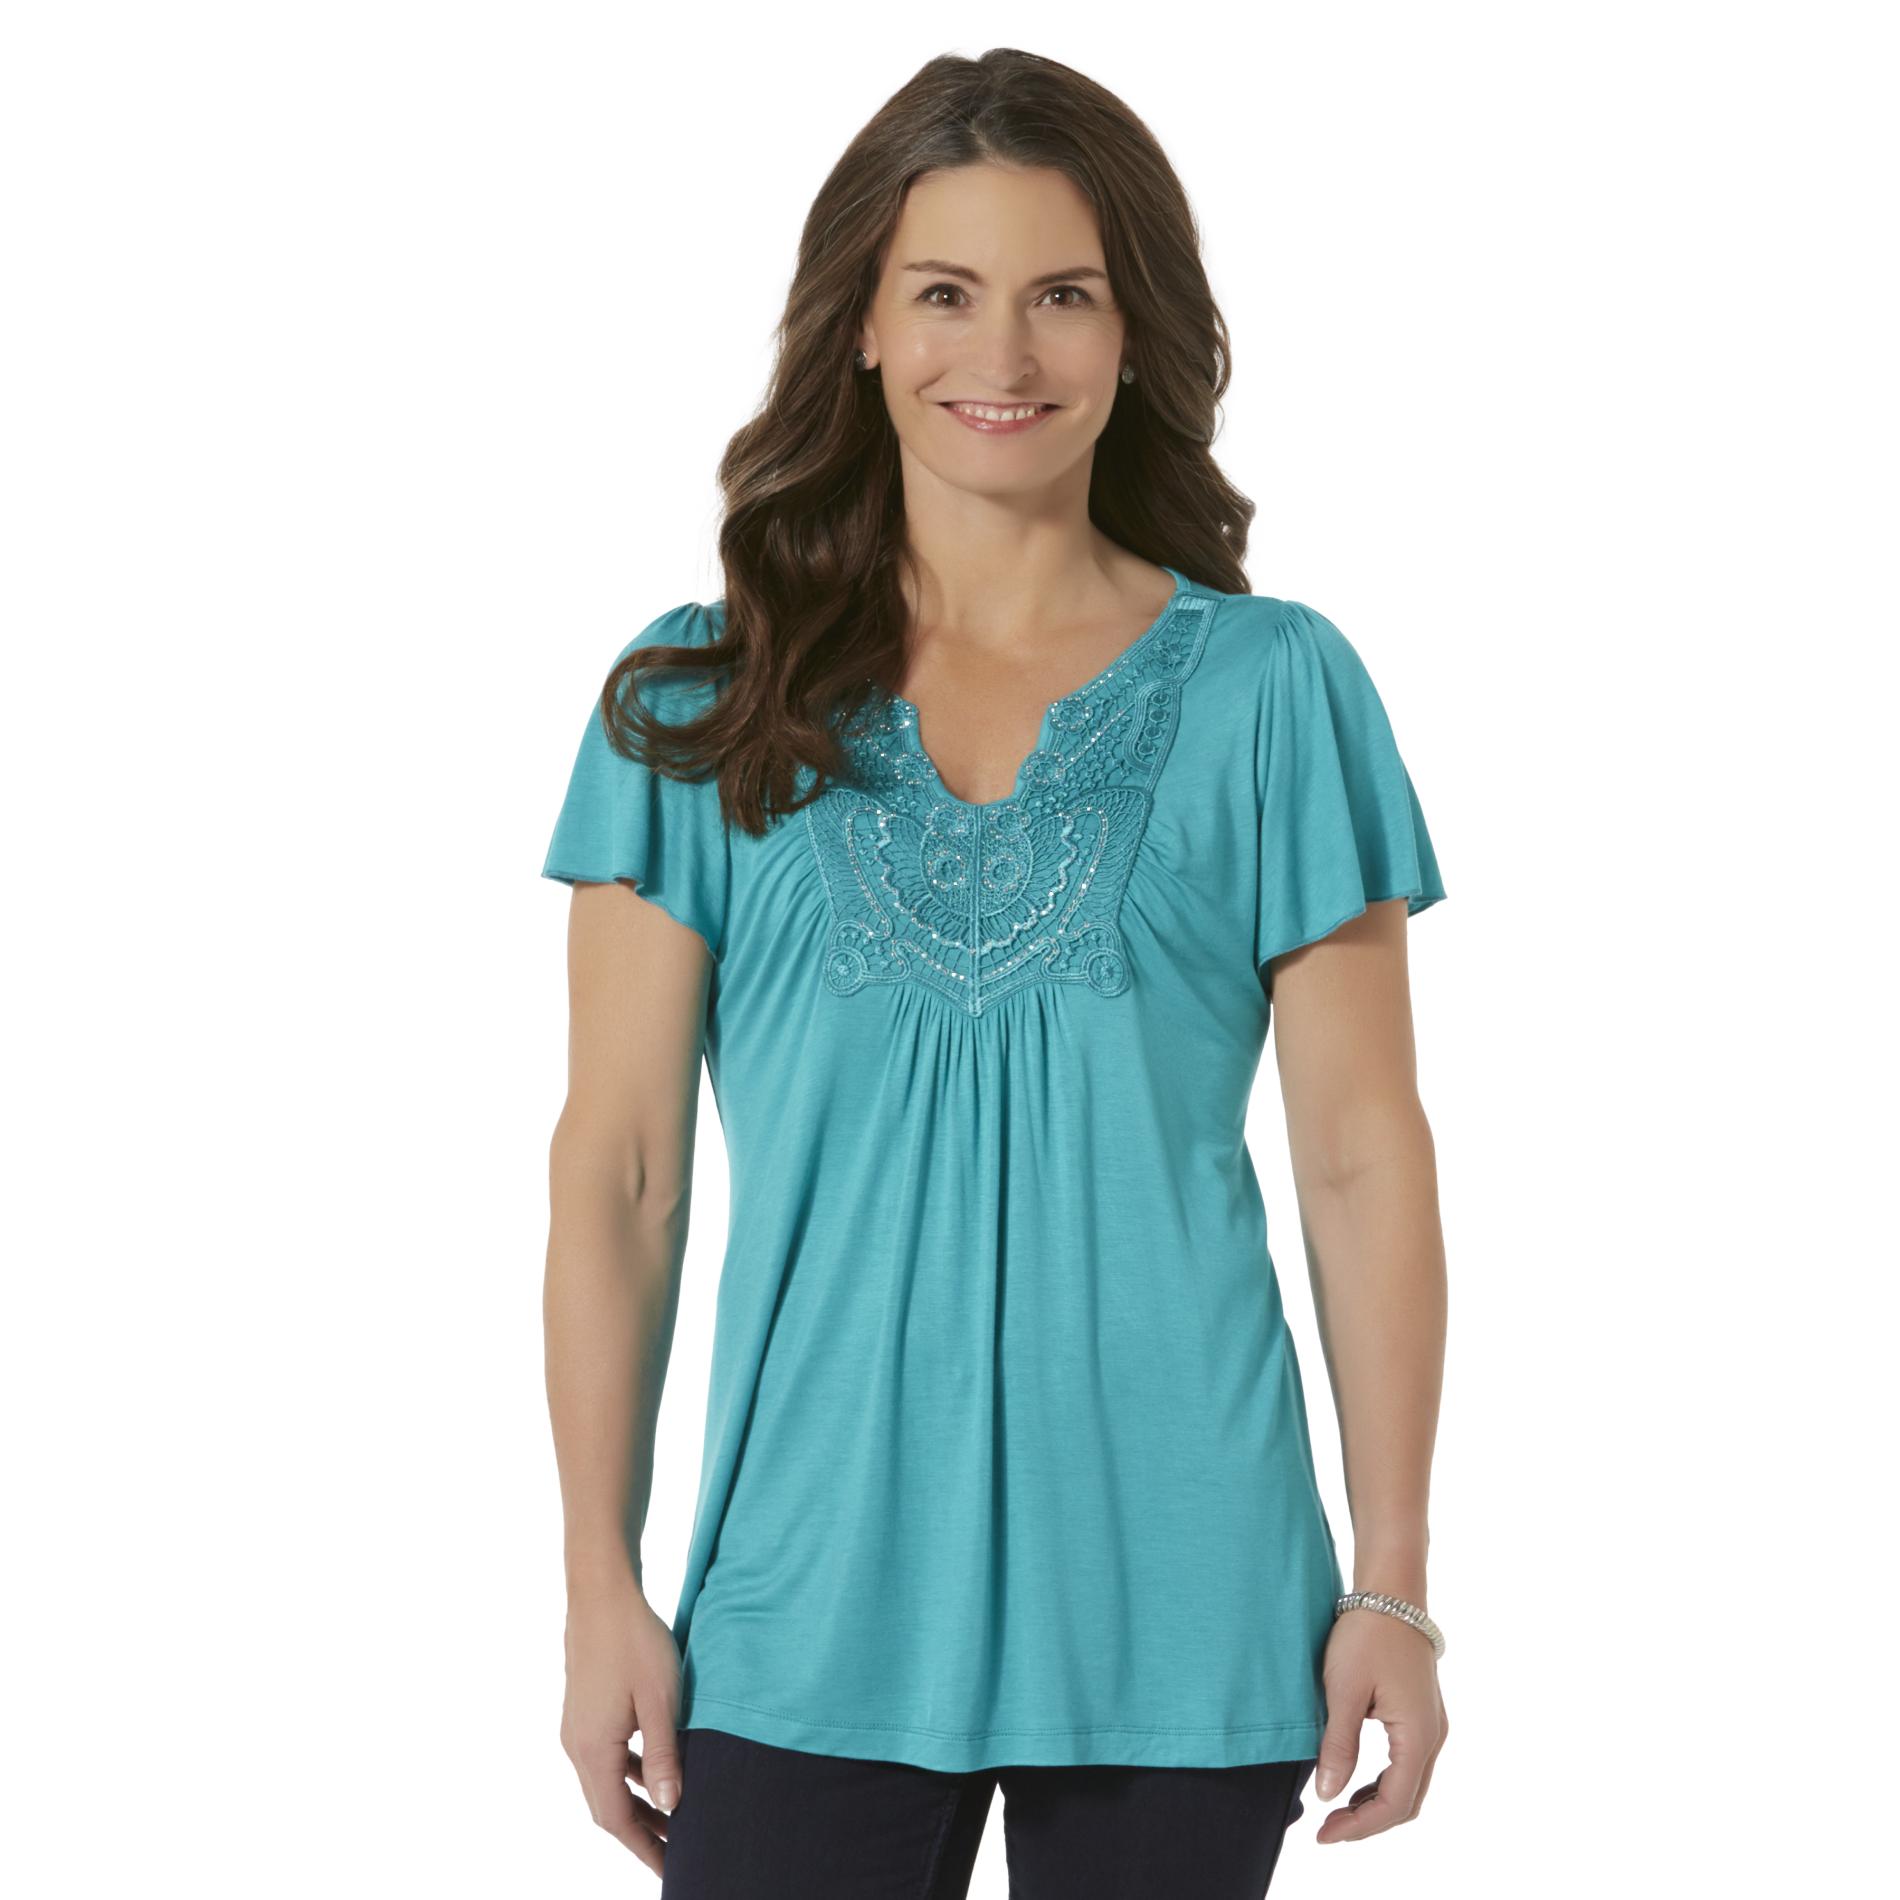 Live and Let Live Petite's Embellished Top